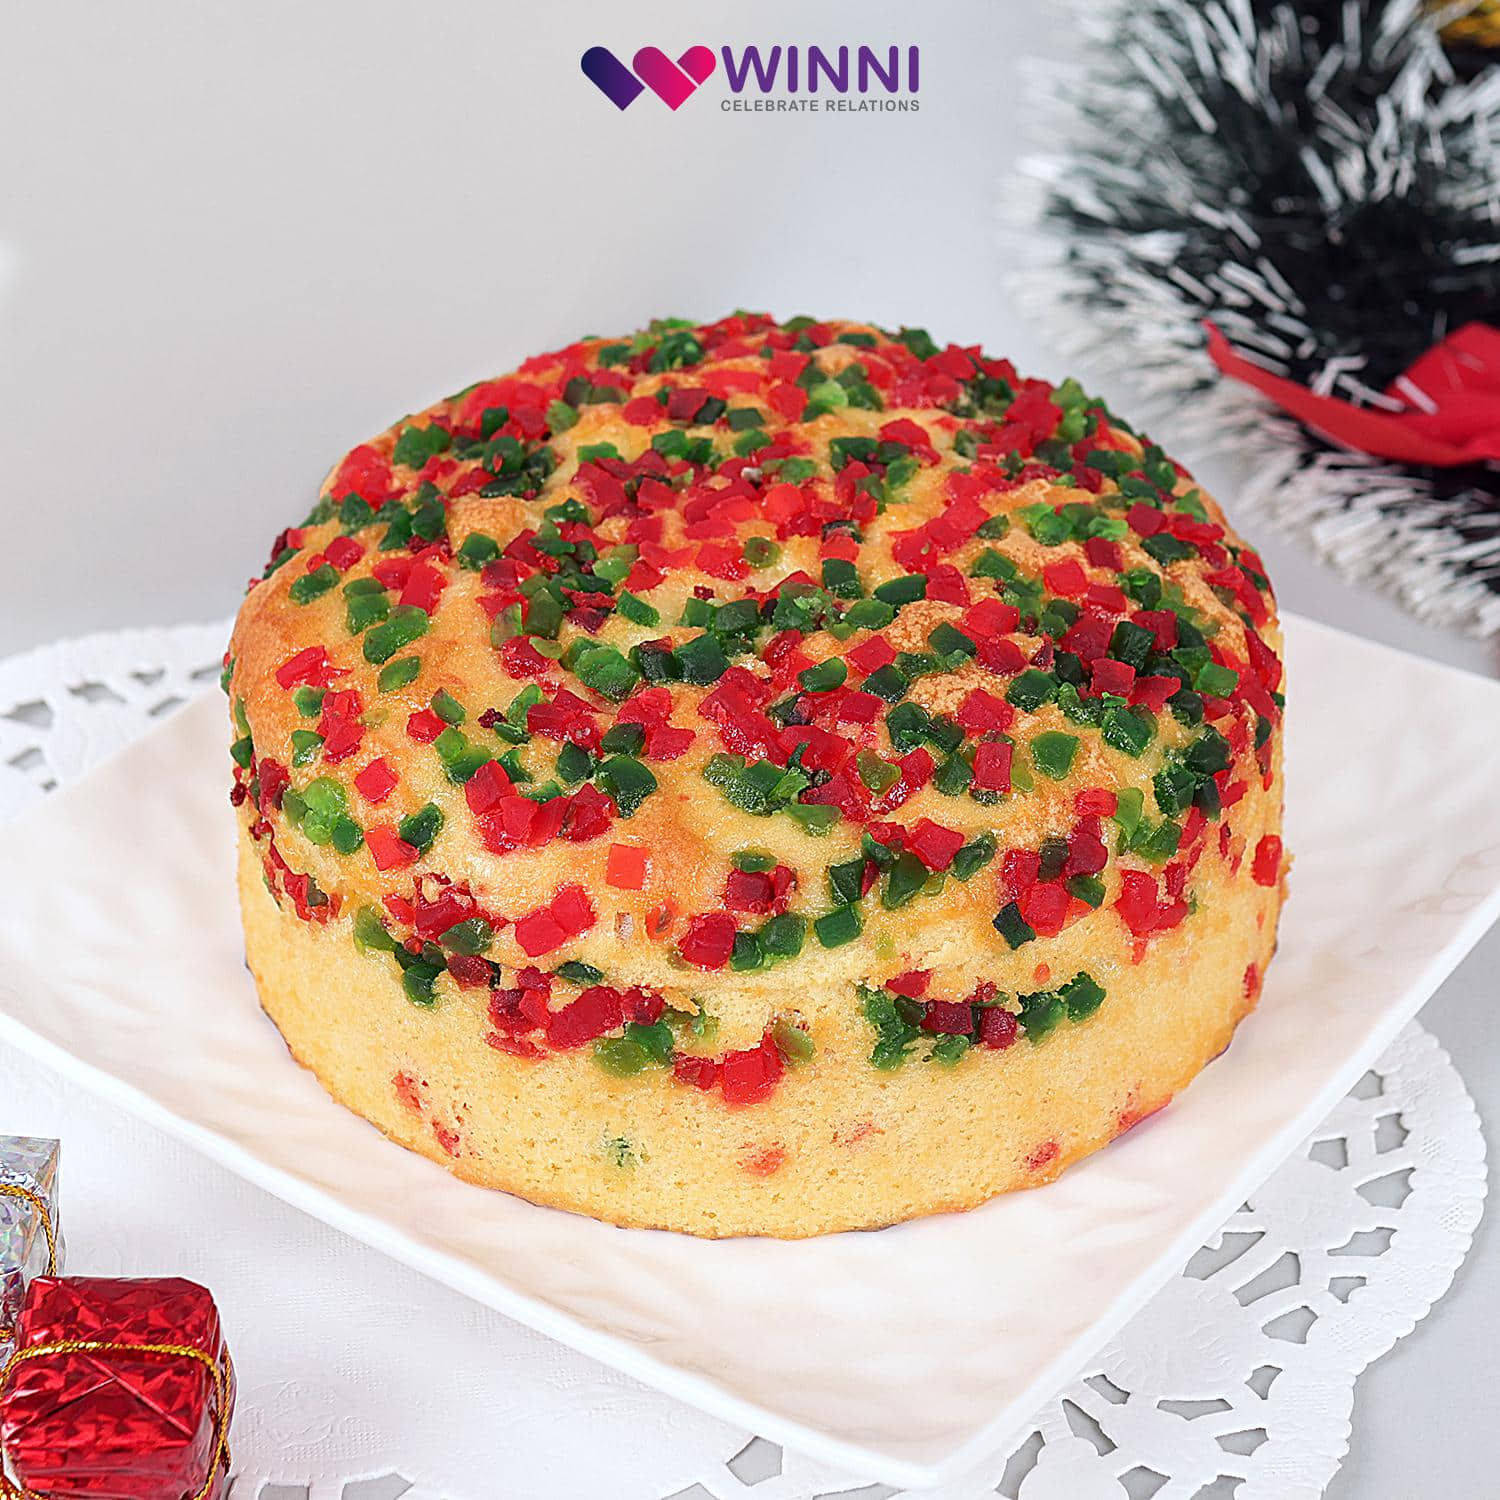 Dry Fruit And Tutti Fruity Cake Half kg : Gift/Send Christmas Gifts Online  HD1150153 |IGP.com